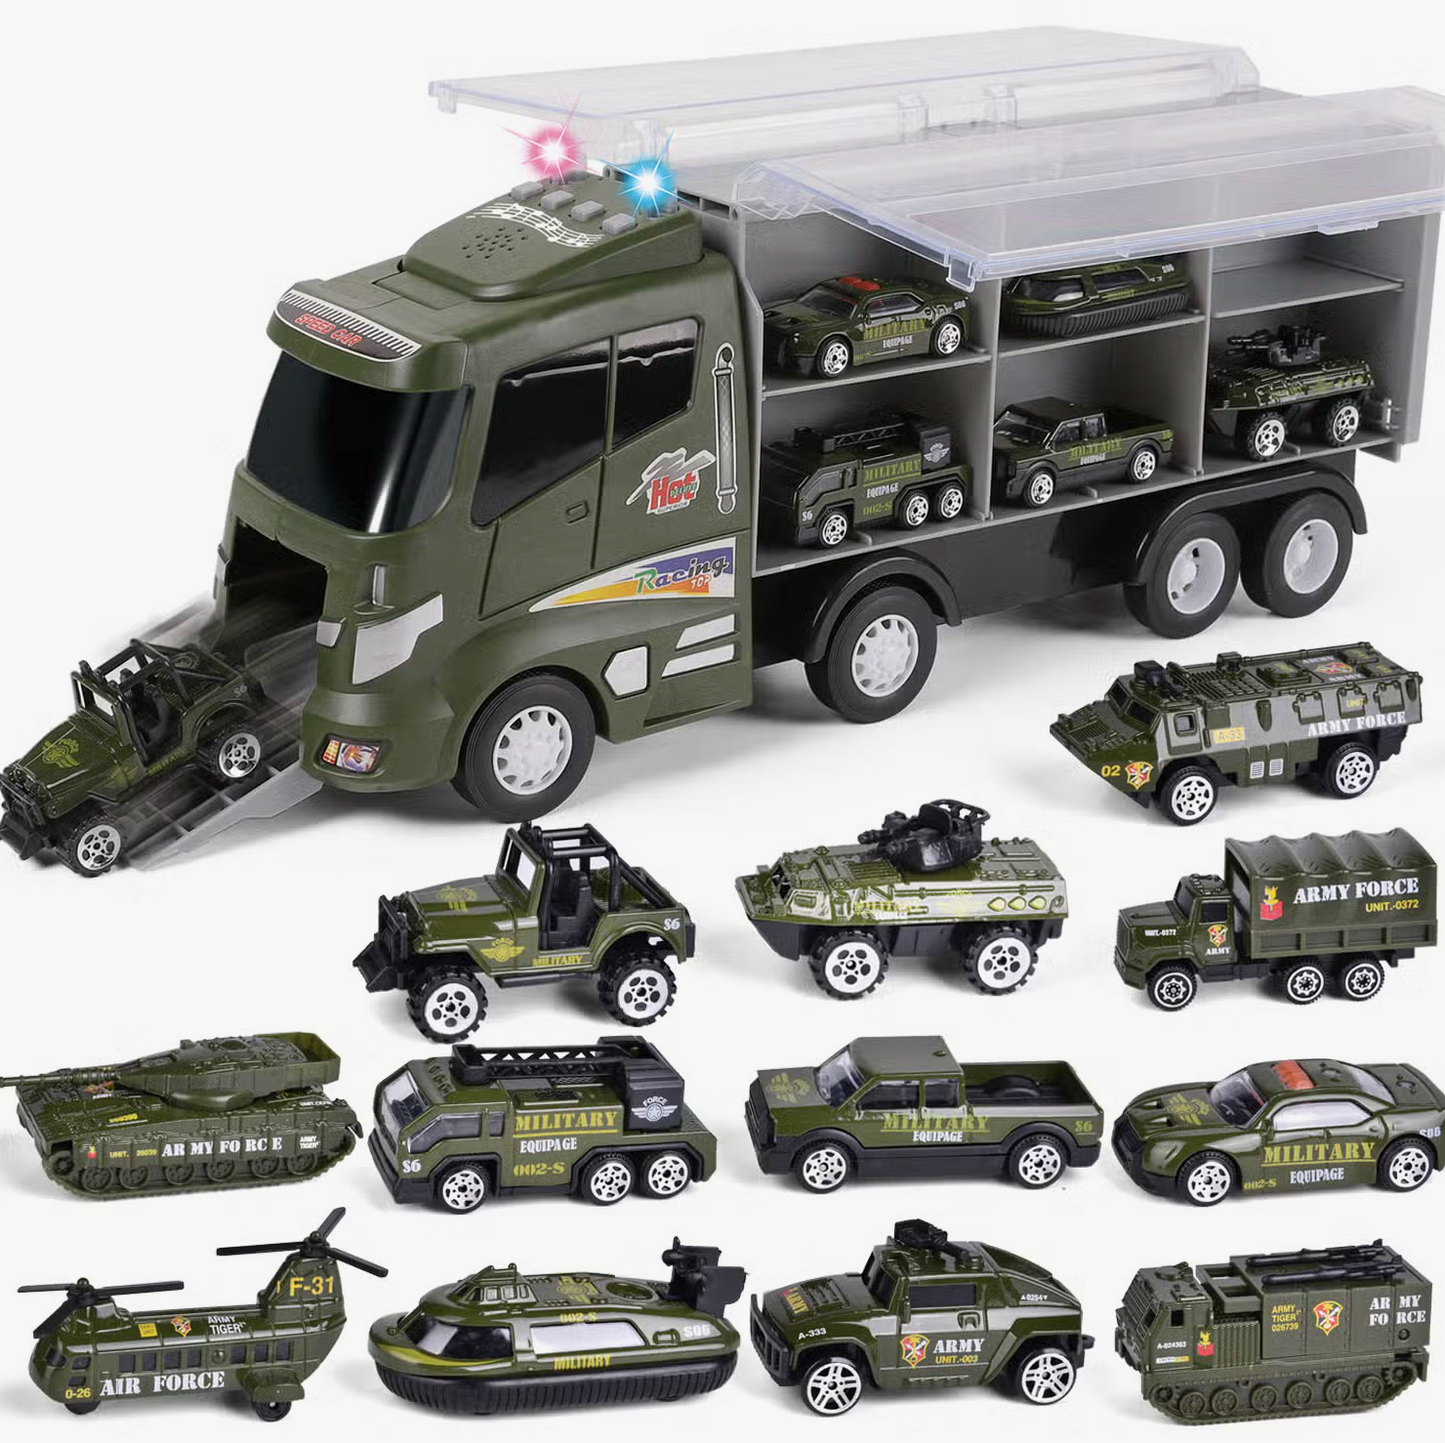 Fun Little Toys Military Truck Toy Set